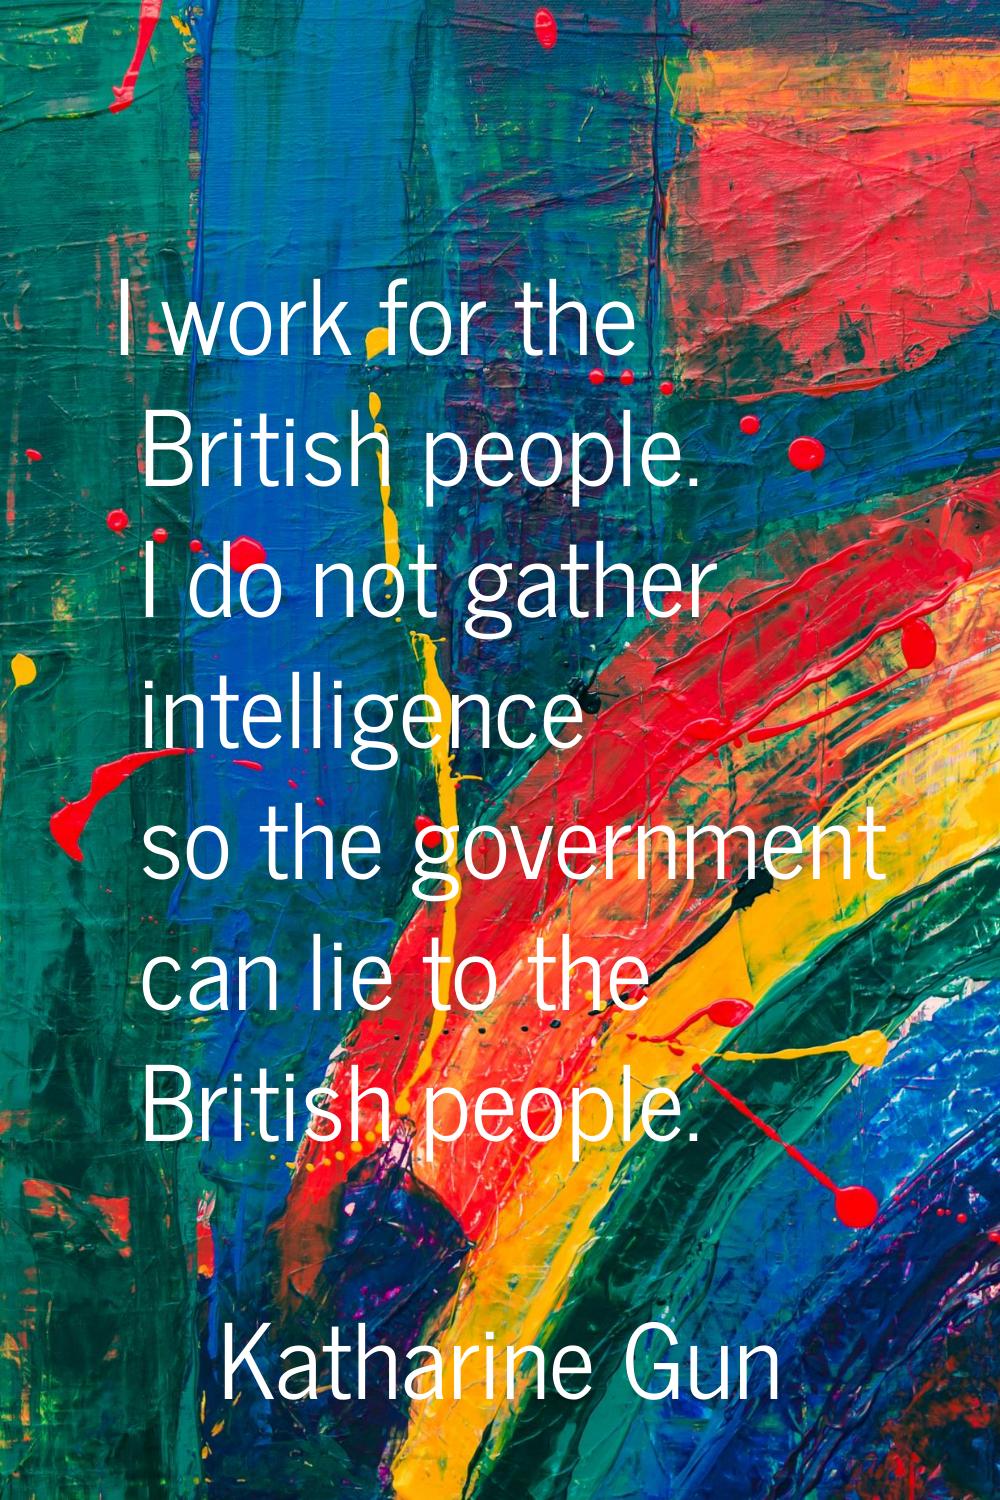 I work for the British people. I do not gather intelligence so the government can lie to the Britis